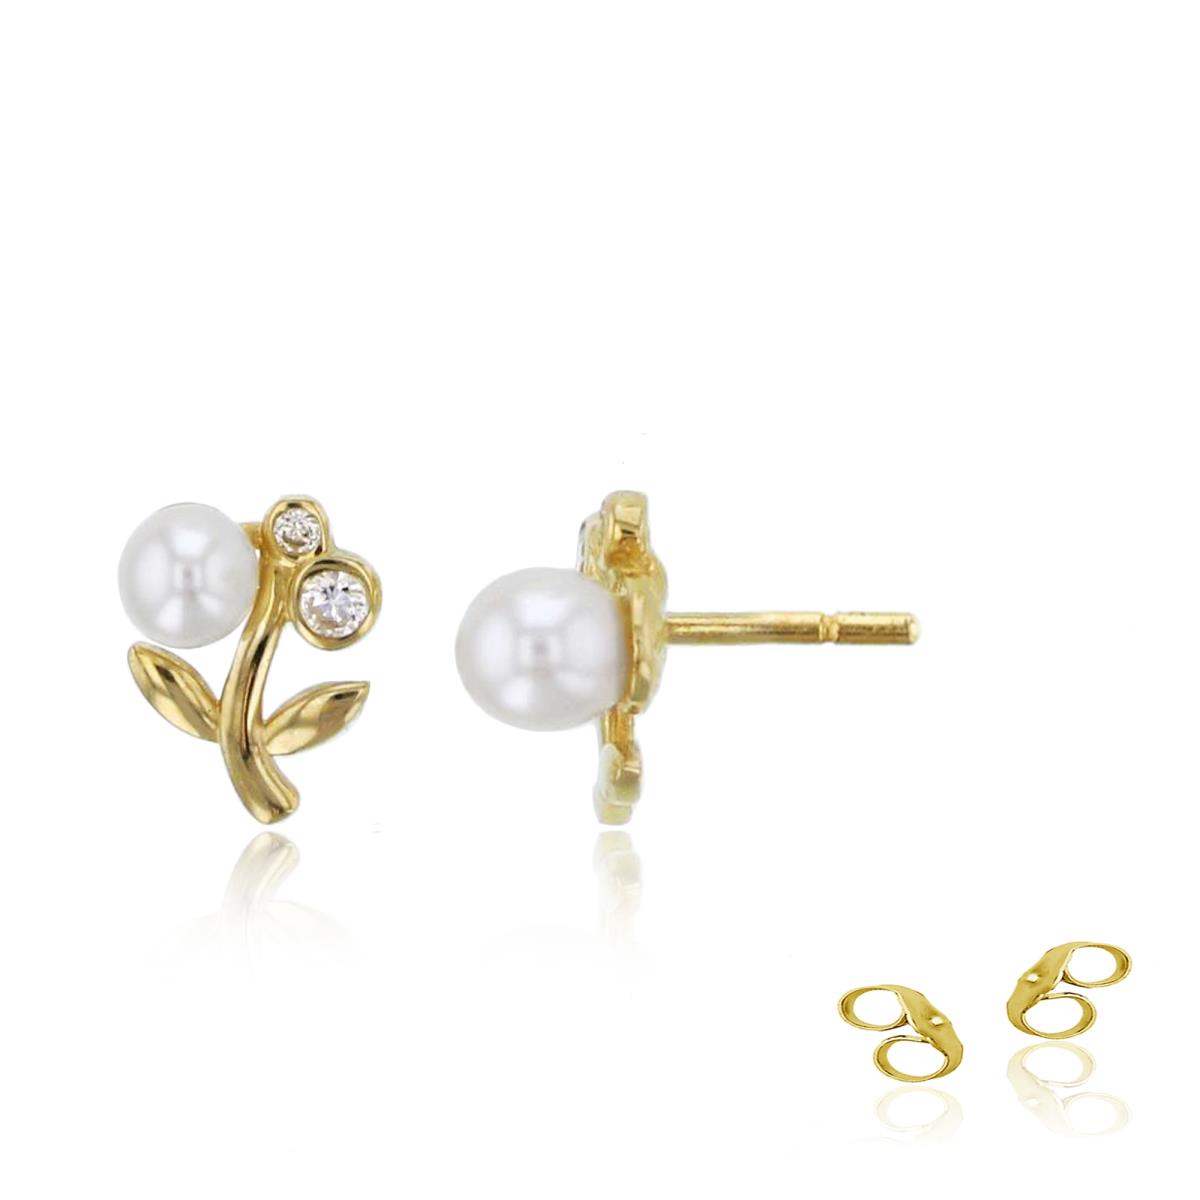 14K Yellow Gold Rnd Cr. White Sapphire & Fresh Water Pearl Cherry Studs with 4.5mm Clutch